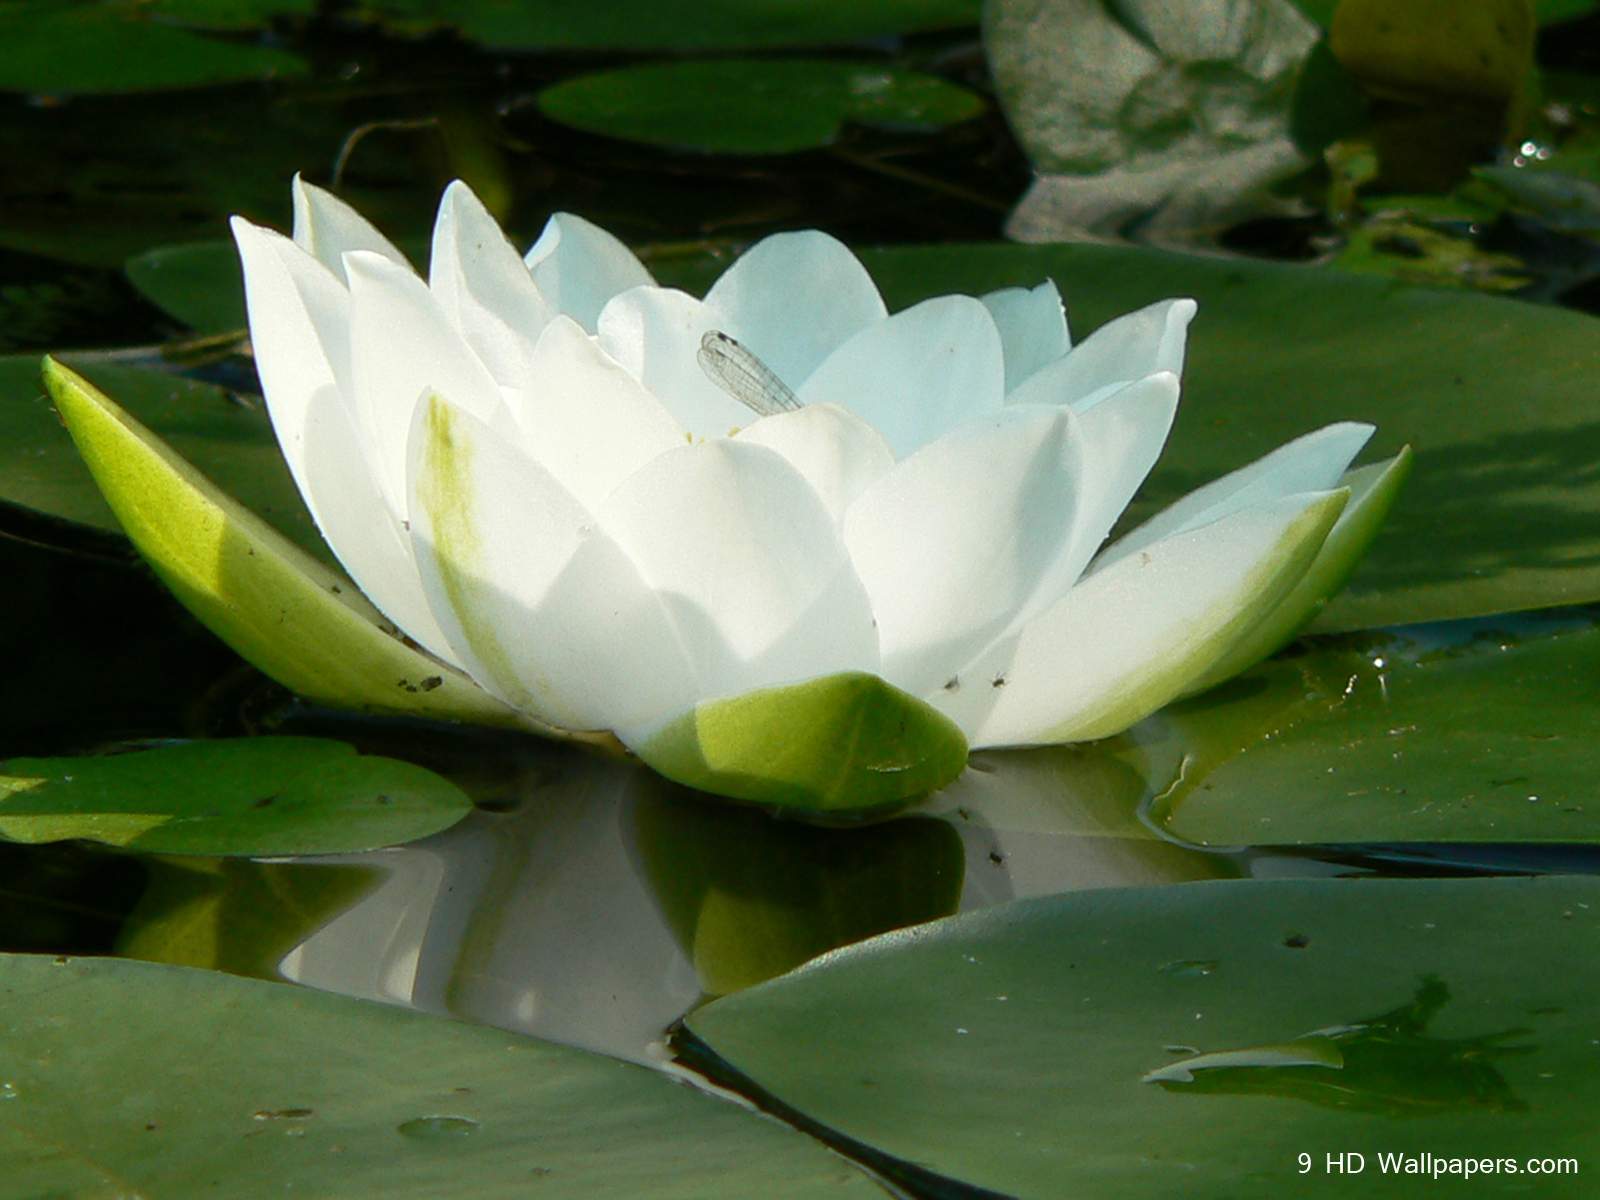 Lotus Flower HD Wallpaper, Flowers Image And Photo